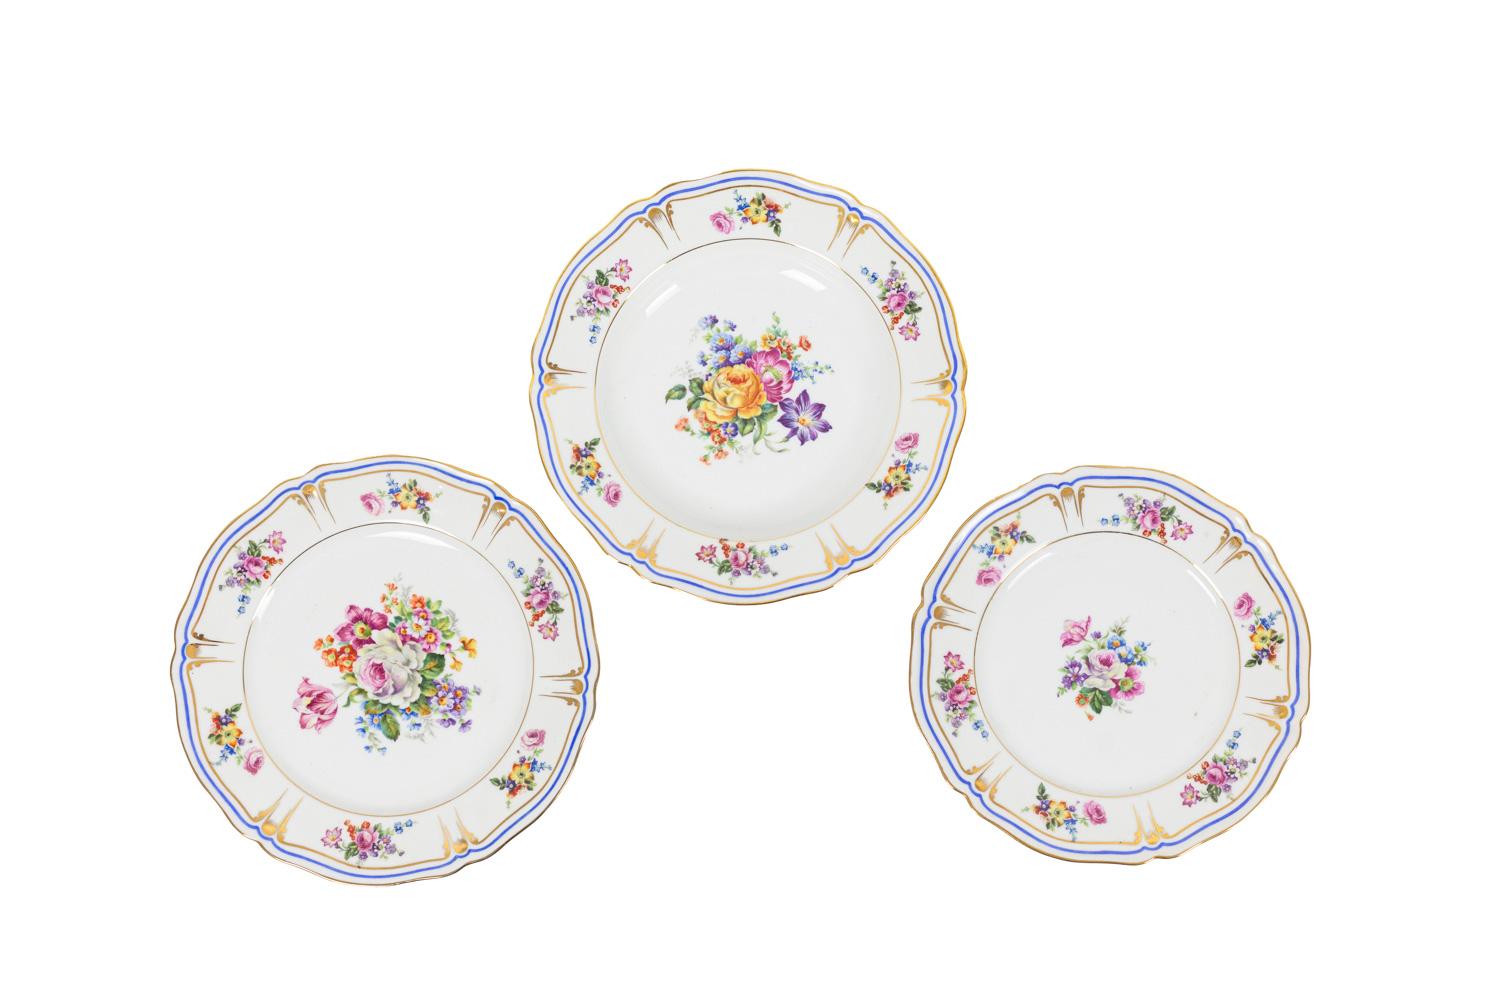 Set in Limoges porcelain decorated with blue and gilt edges on scalloped edges and decor of polychrome flowers on the edge and the center of different elements. It is composed by 36 dinner plates, 12 soup plates, 12 dessert plates, 2 different sizes